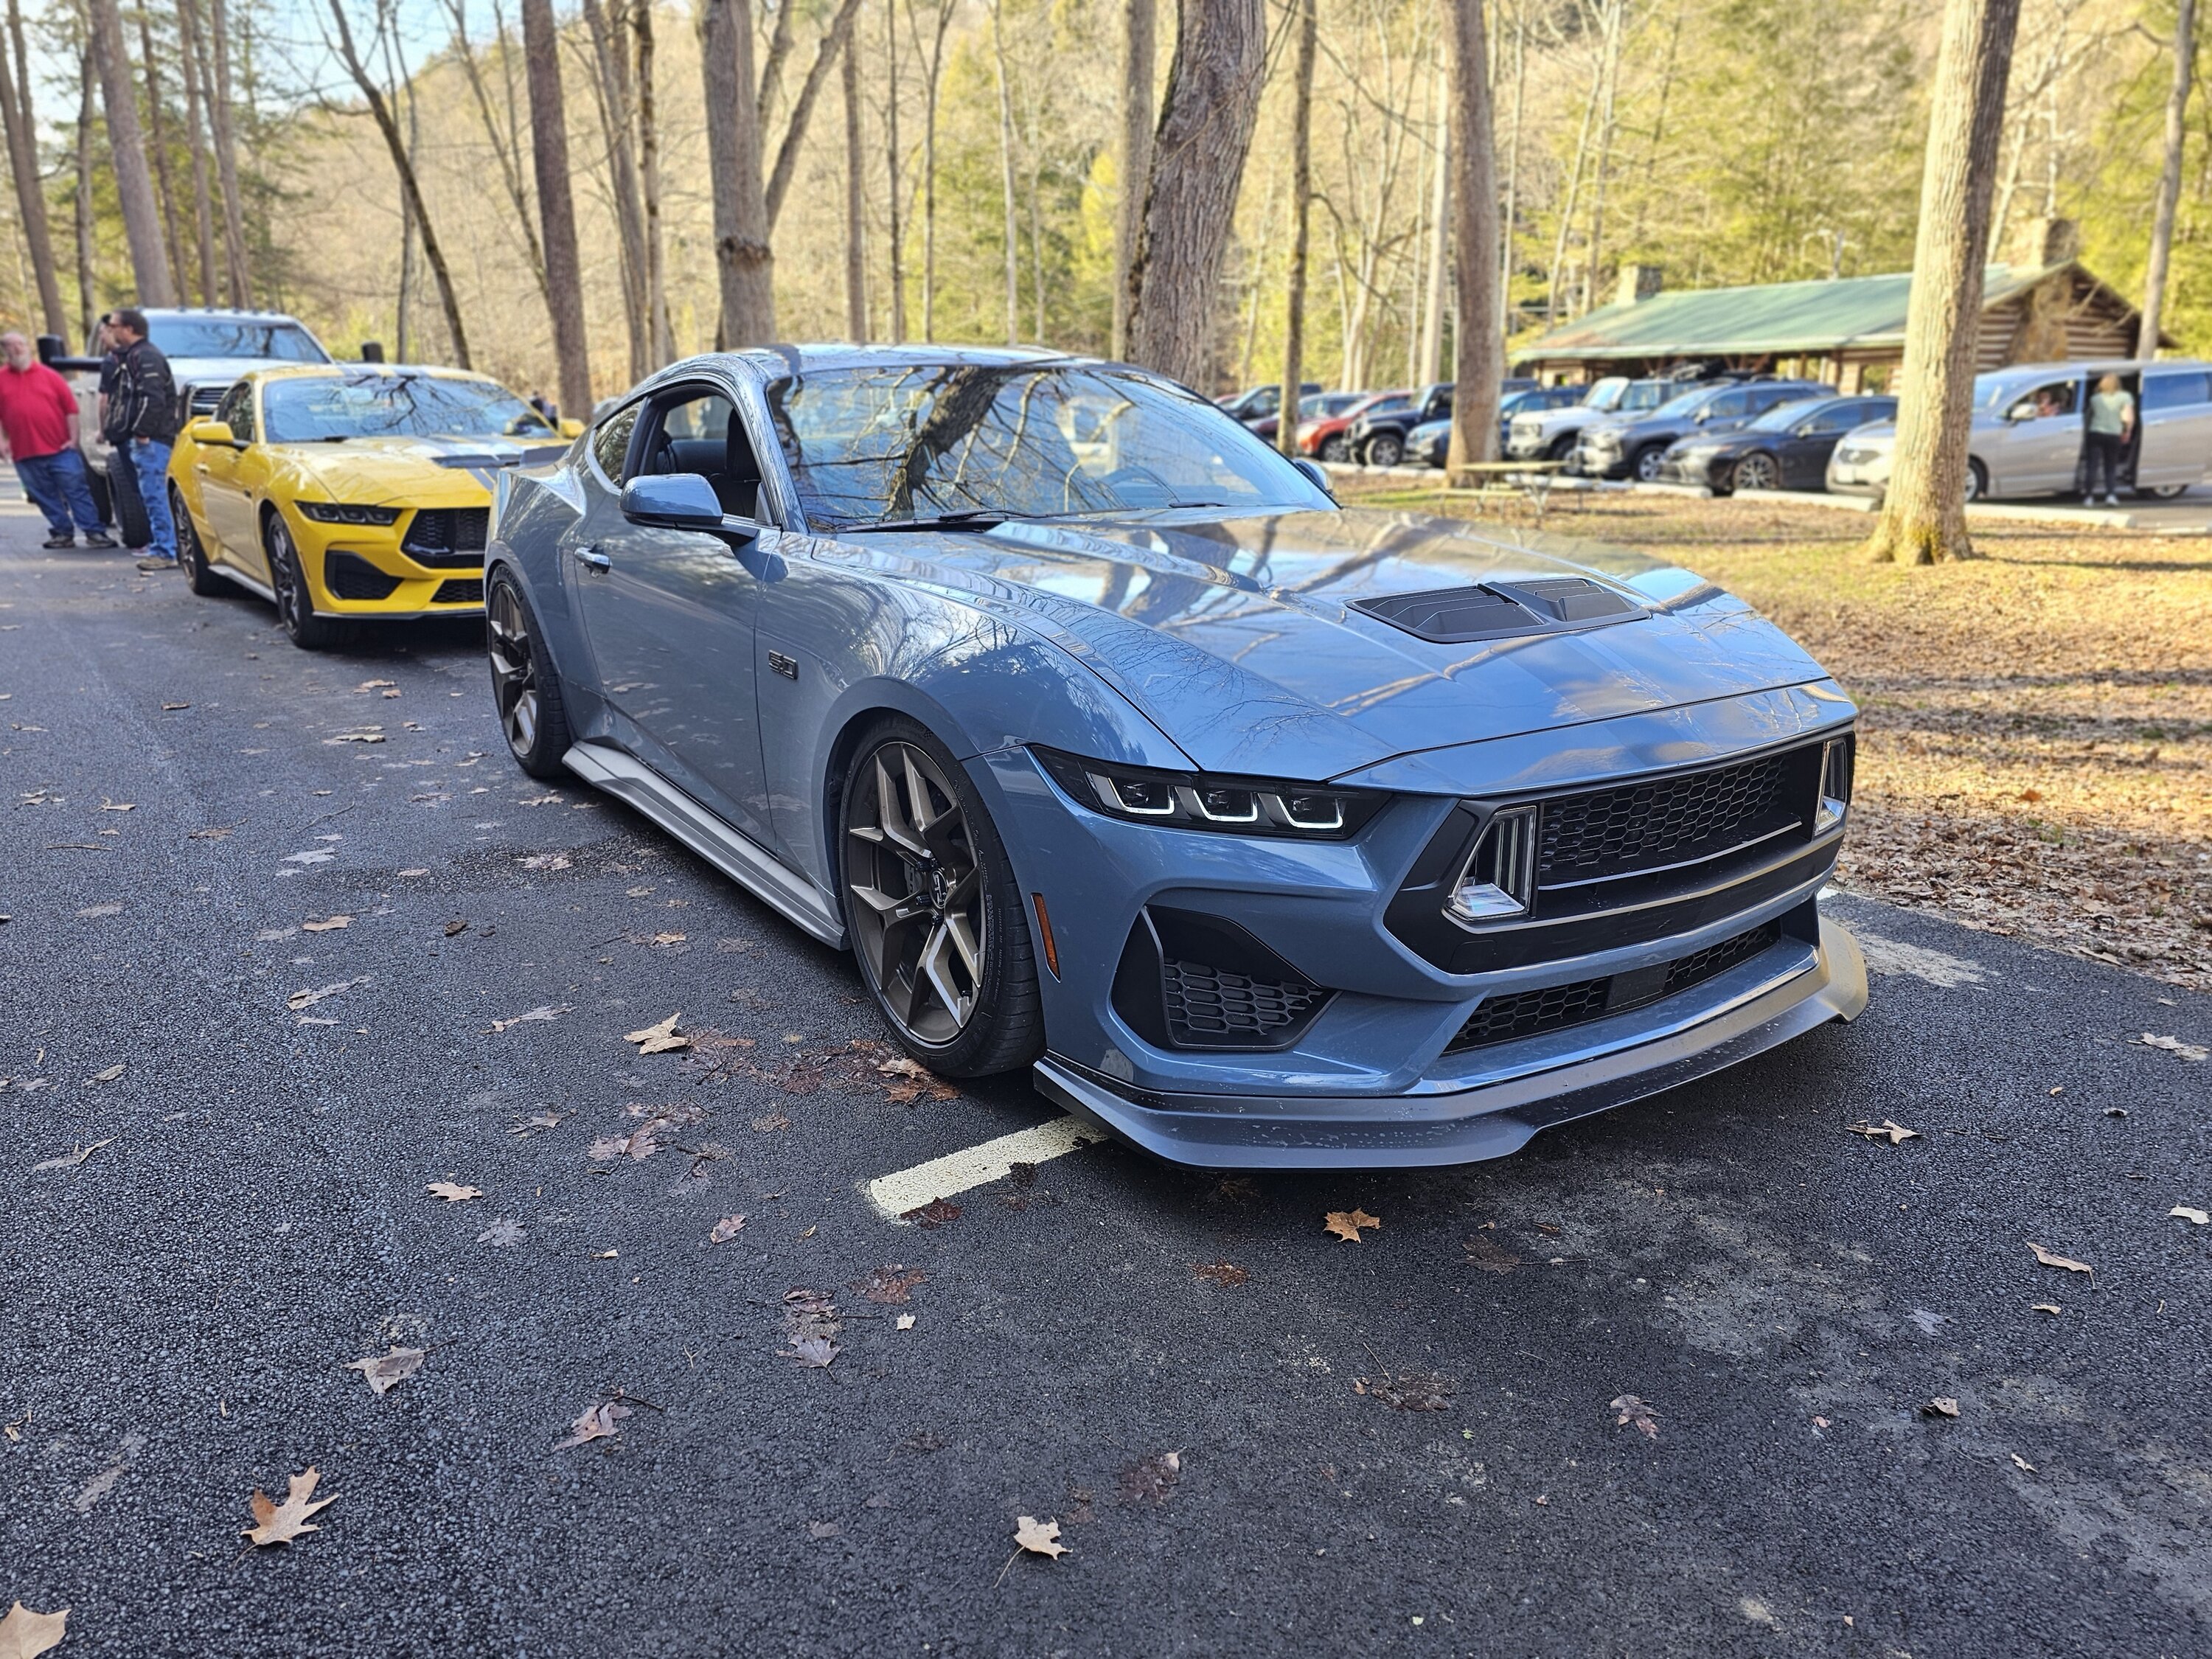 S650 Mustang What's going on with Vapor Blue colour?? Some doubts about the true tone 20240303_155711